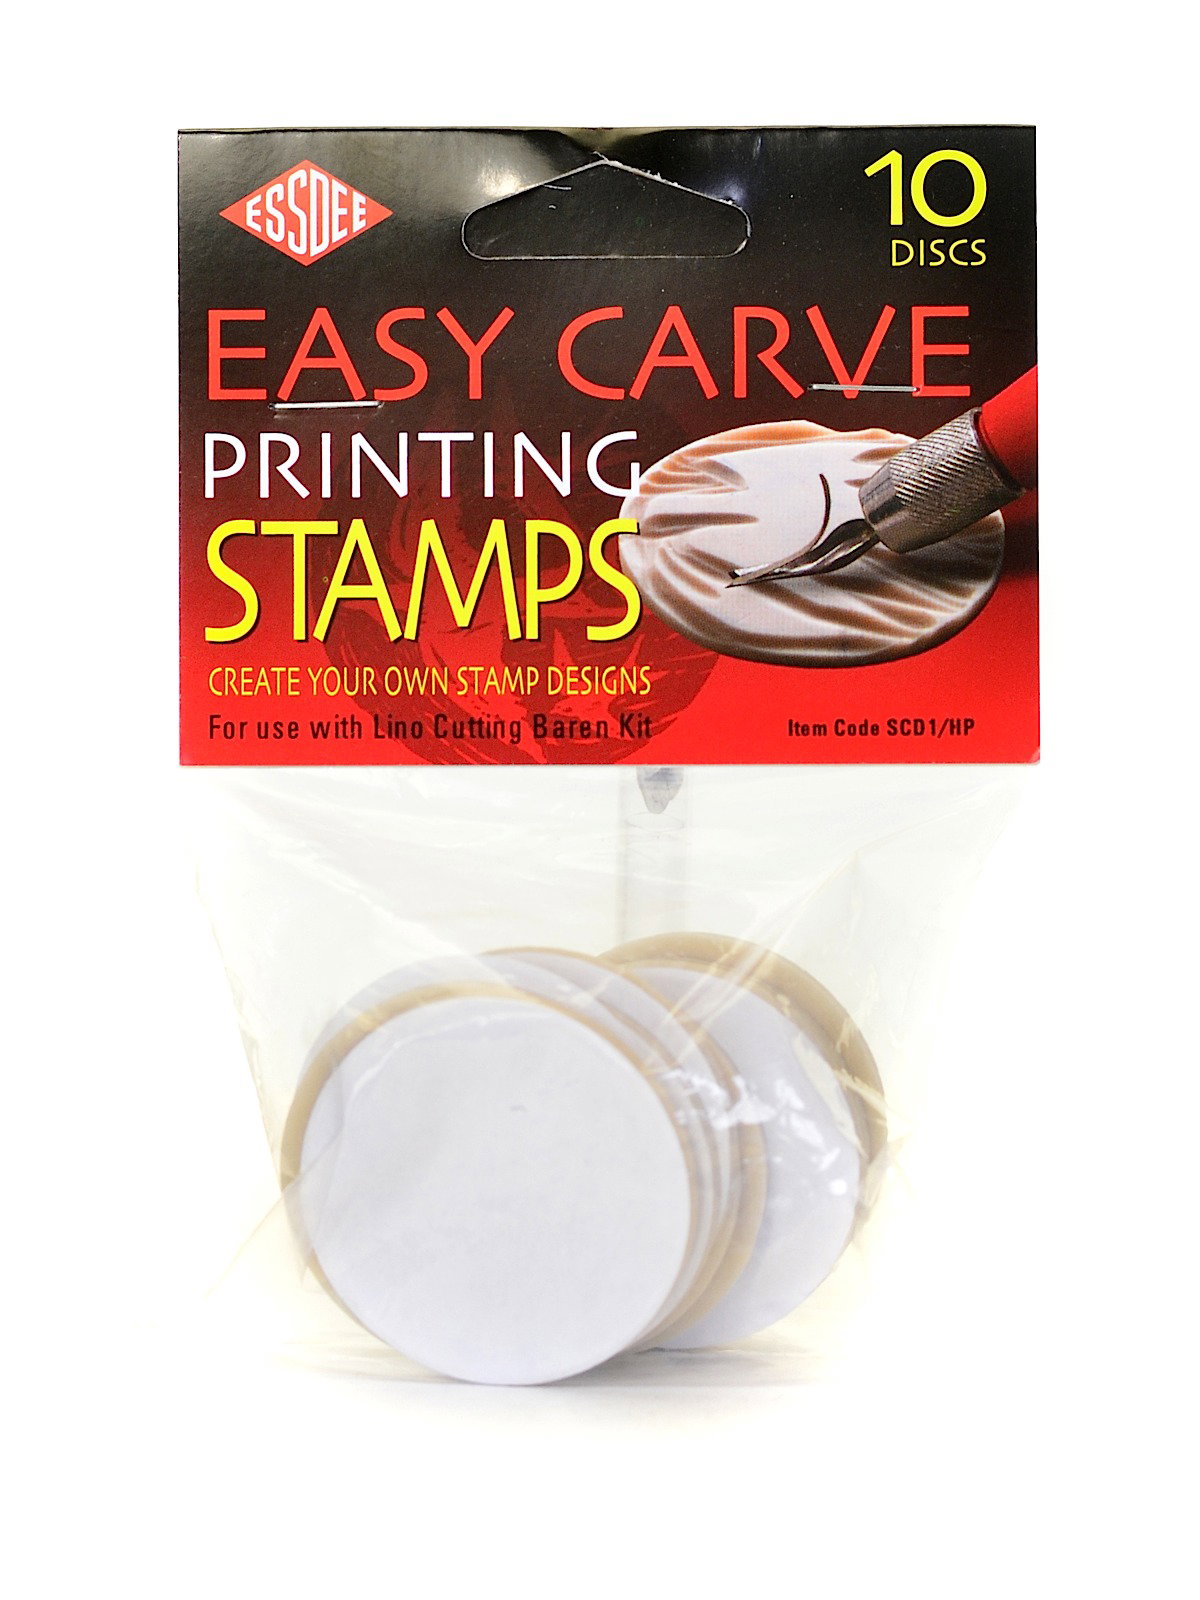 Making Our Own Rubber Stamps  Essdee Stamp Carving Kit 